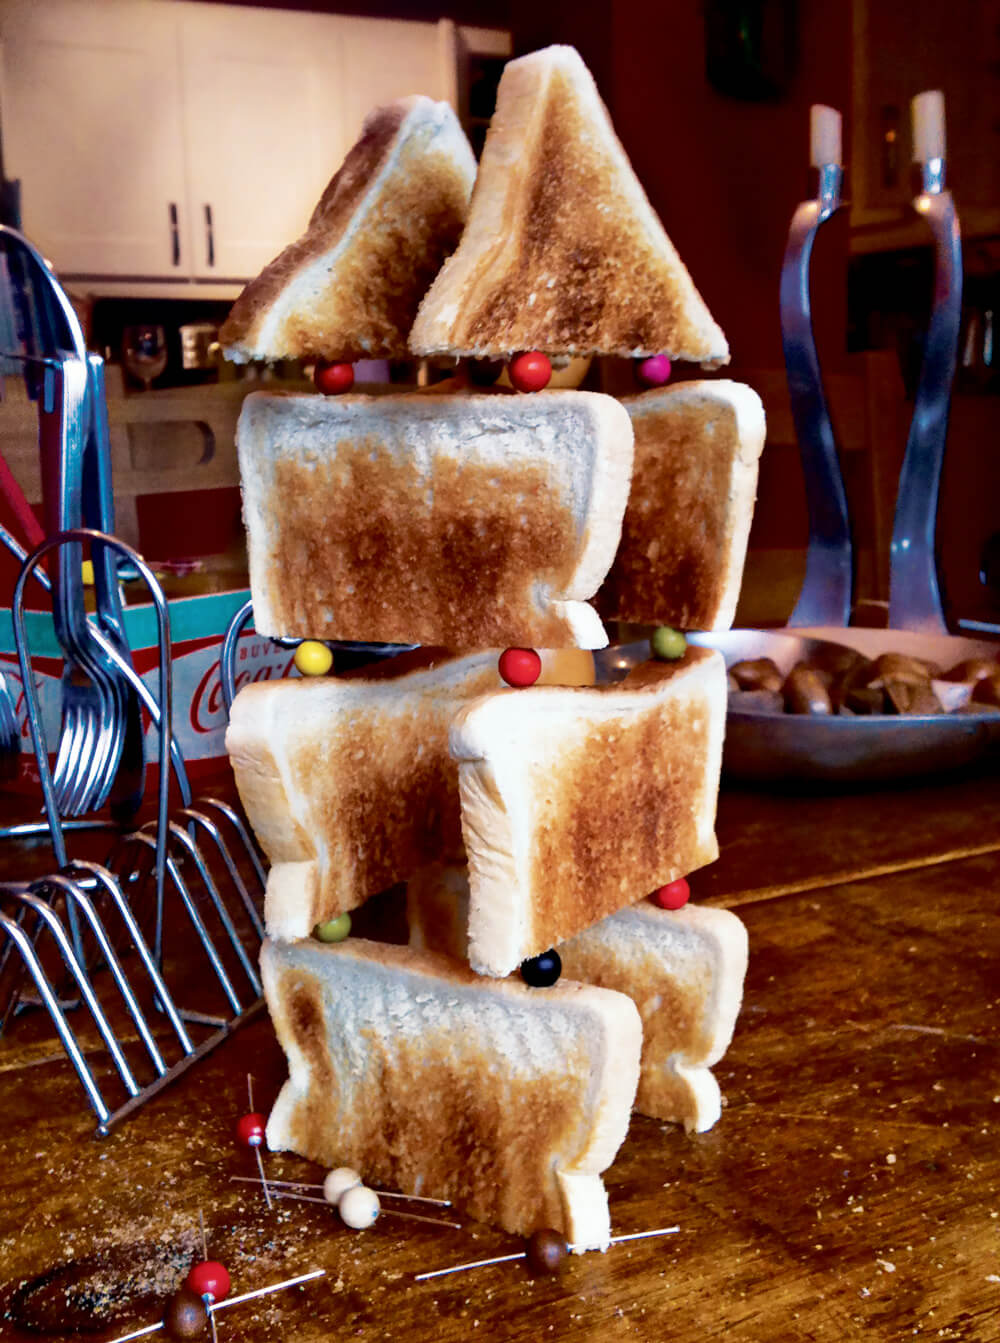 Toast connectors: tower of toast